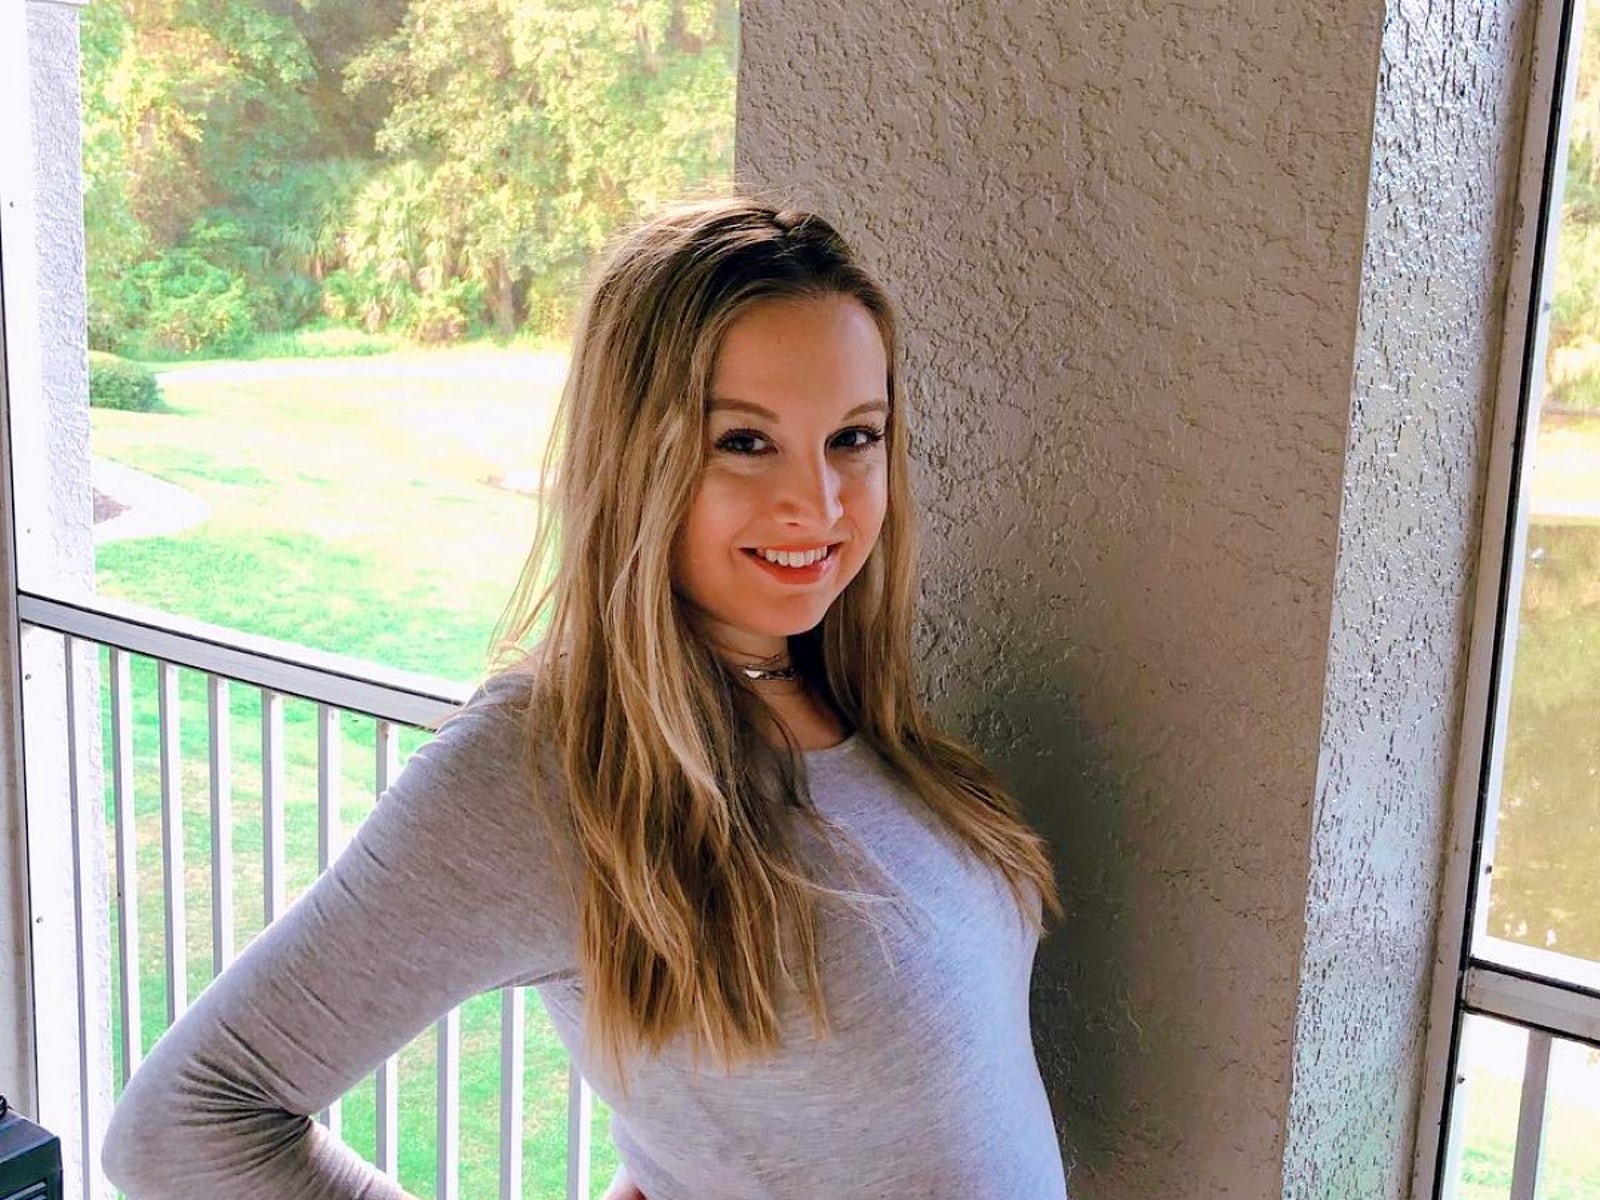 90 Day Fiance Star Elizabeth Potthast Shares New Photo Of Her Growing.